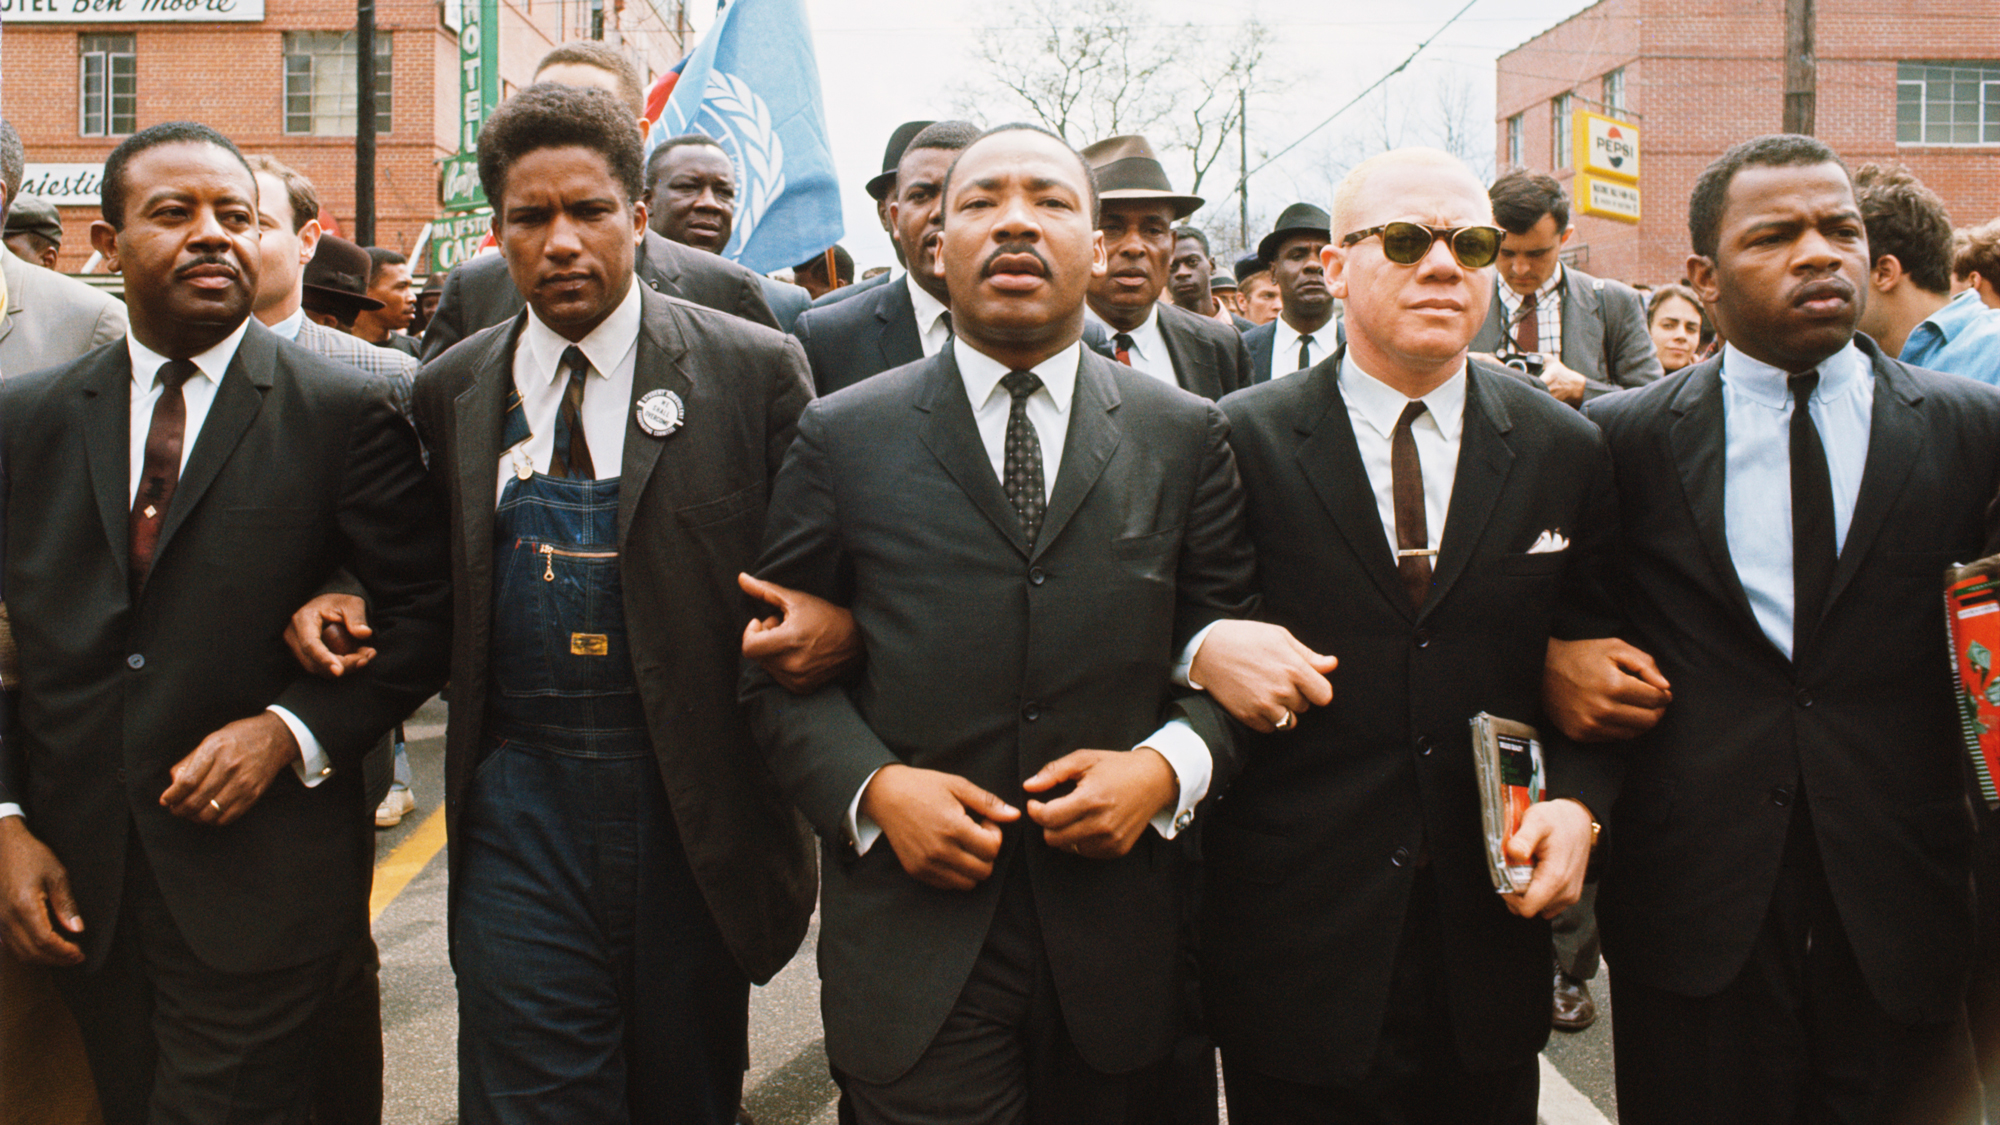 John Lewis: King Inspired Me to Get in Trouble - The Atlantic